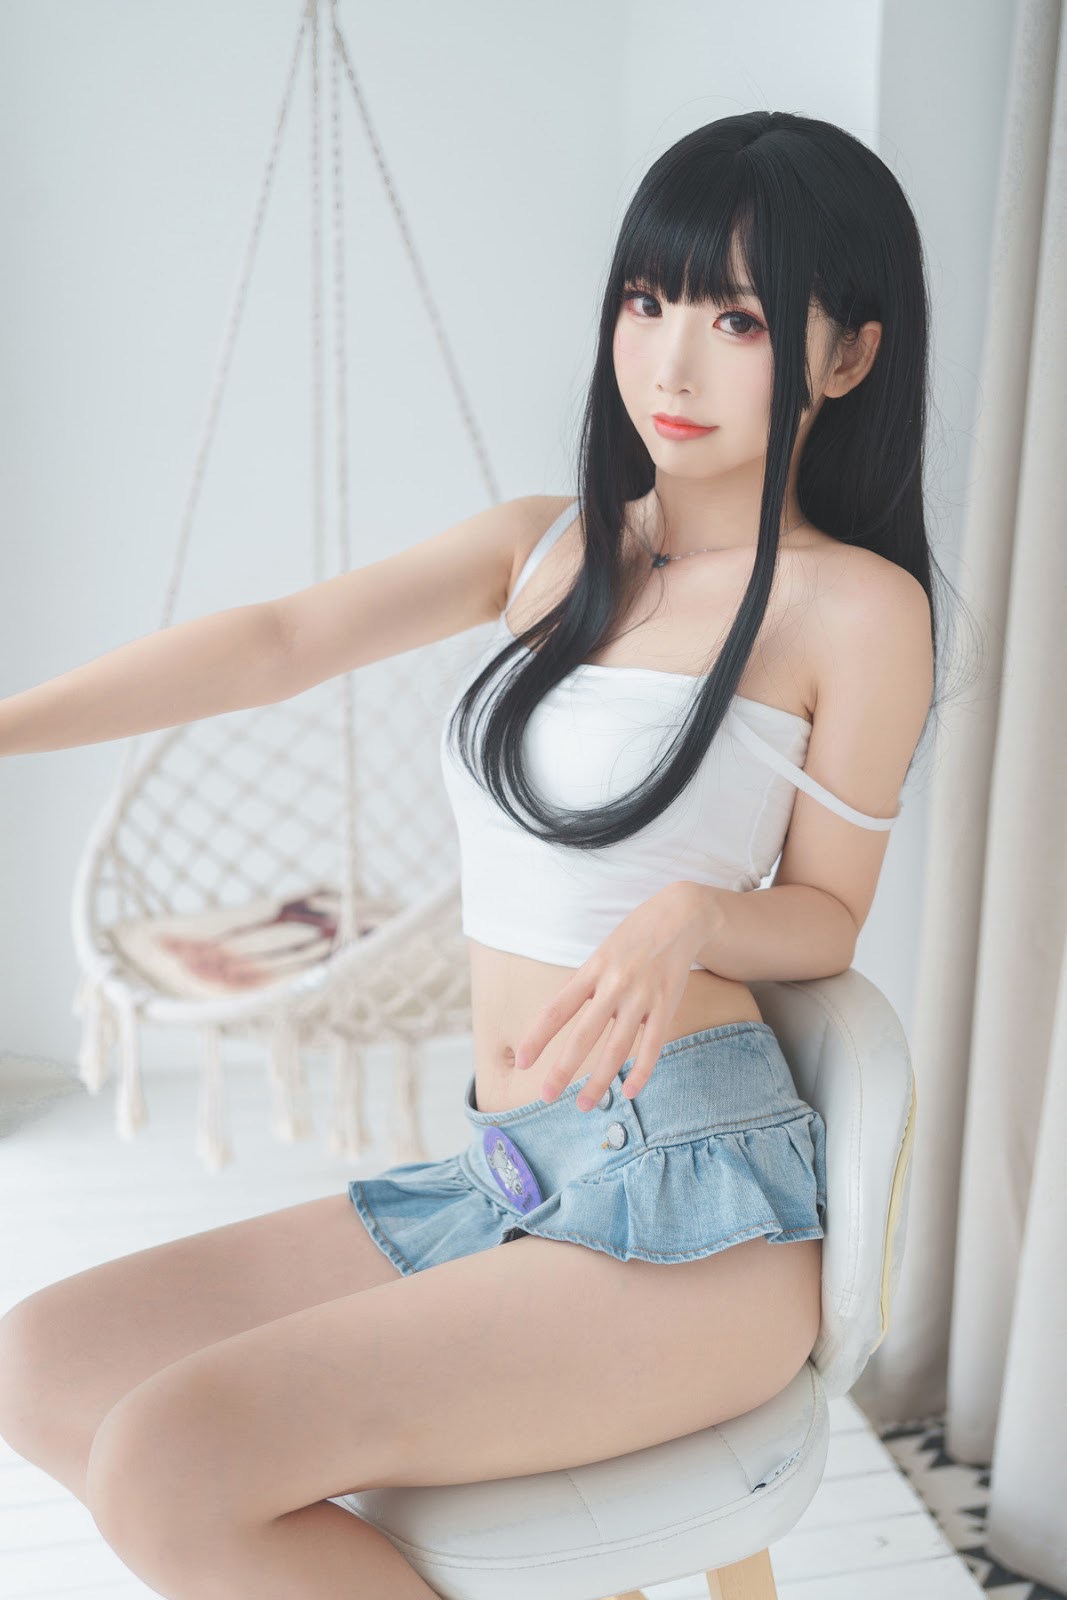 Cosplay 面饼仙儿 可爱女友(9)